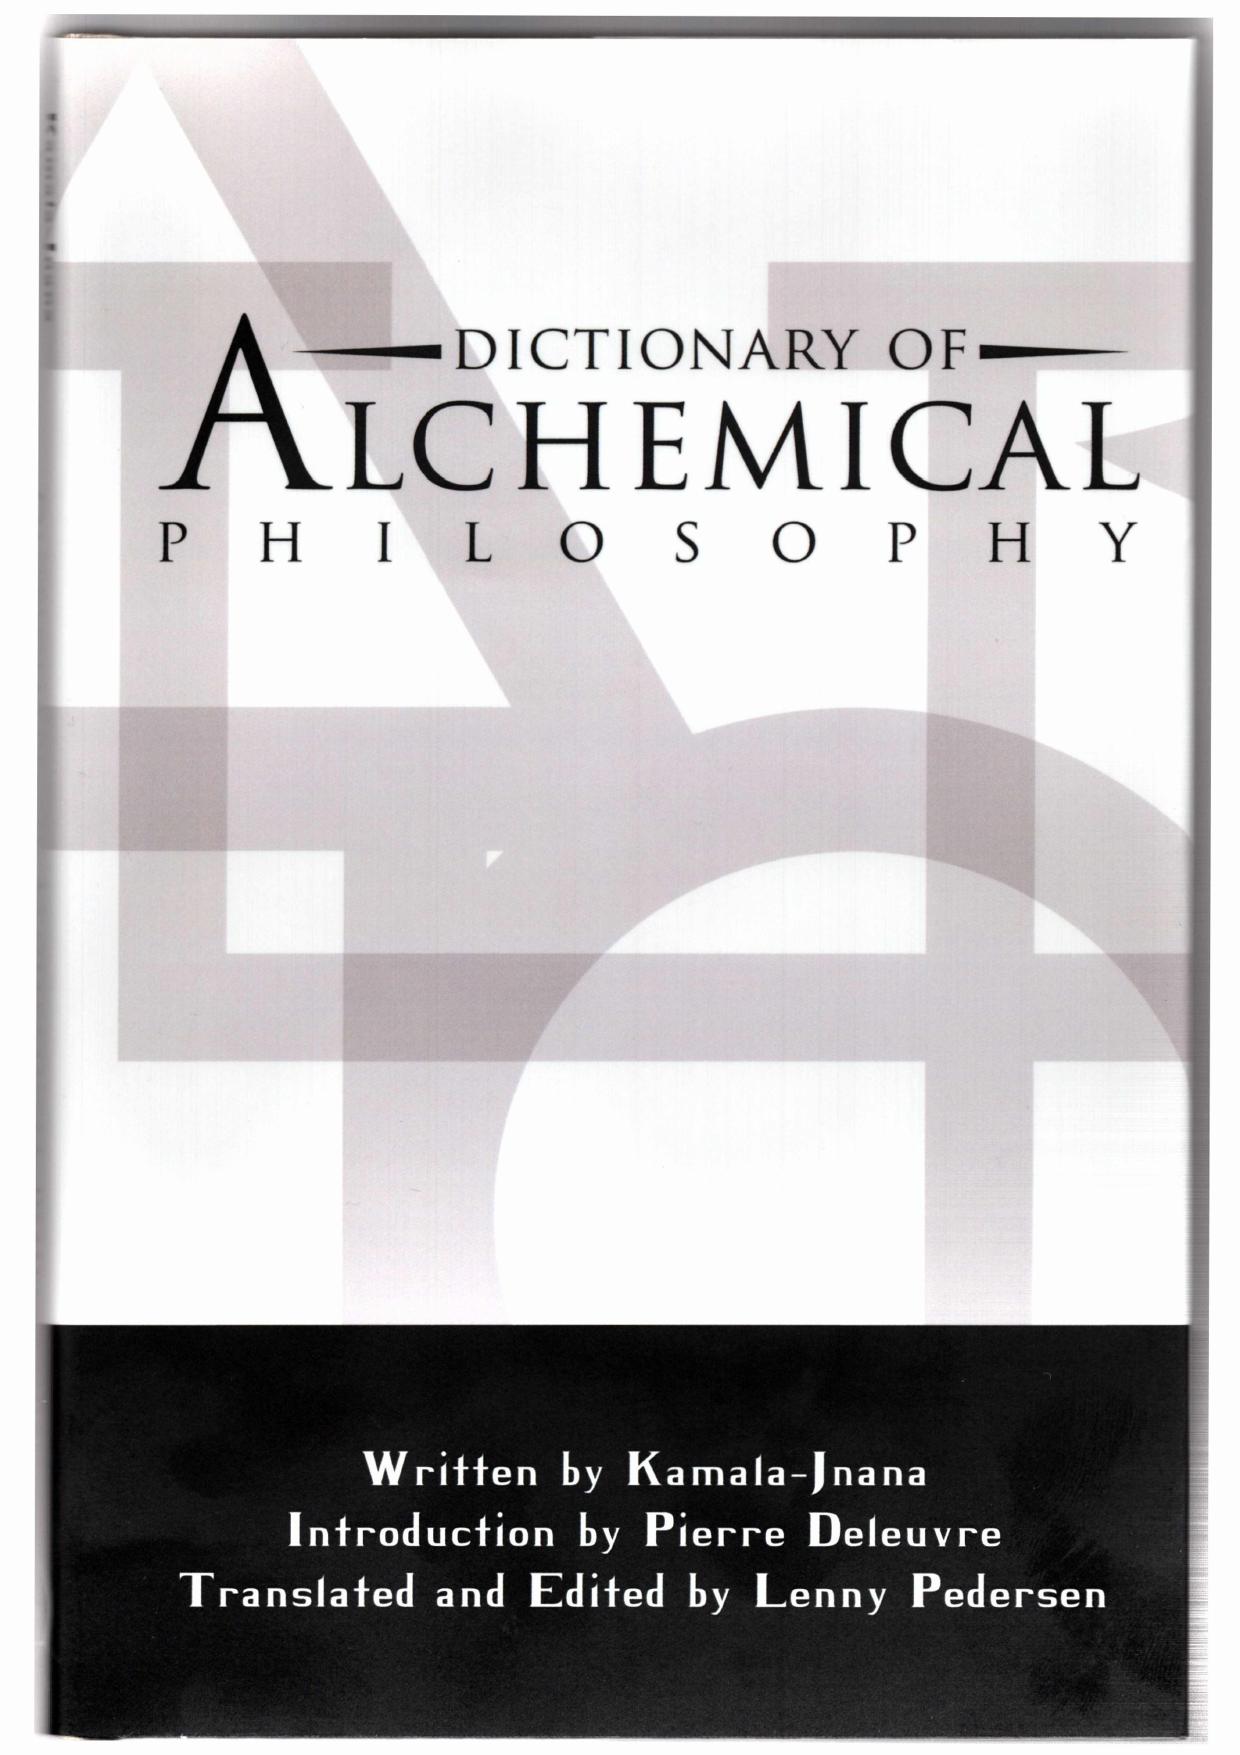 Dictionary of Alchemical Philosophy